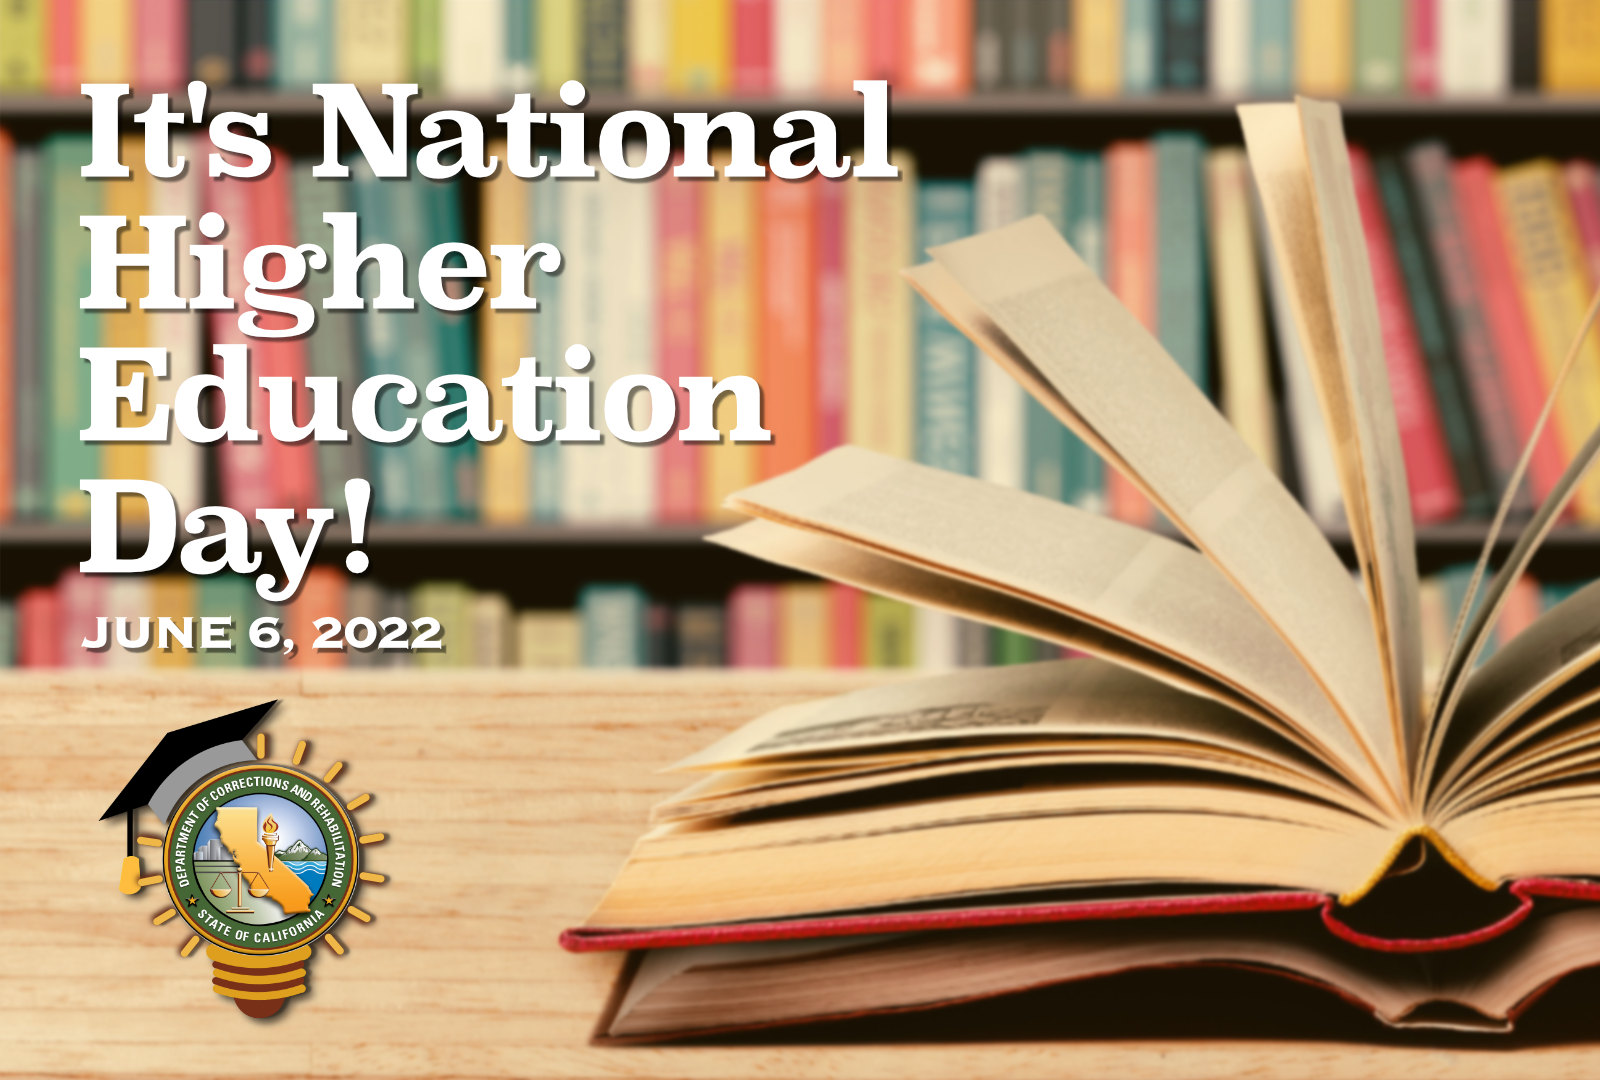 It's National Higher Education Day, June 6, 2022